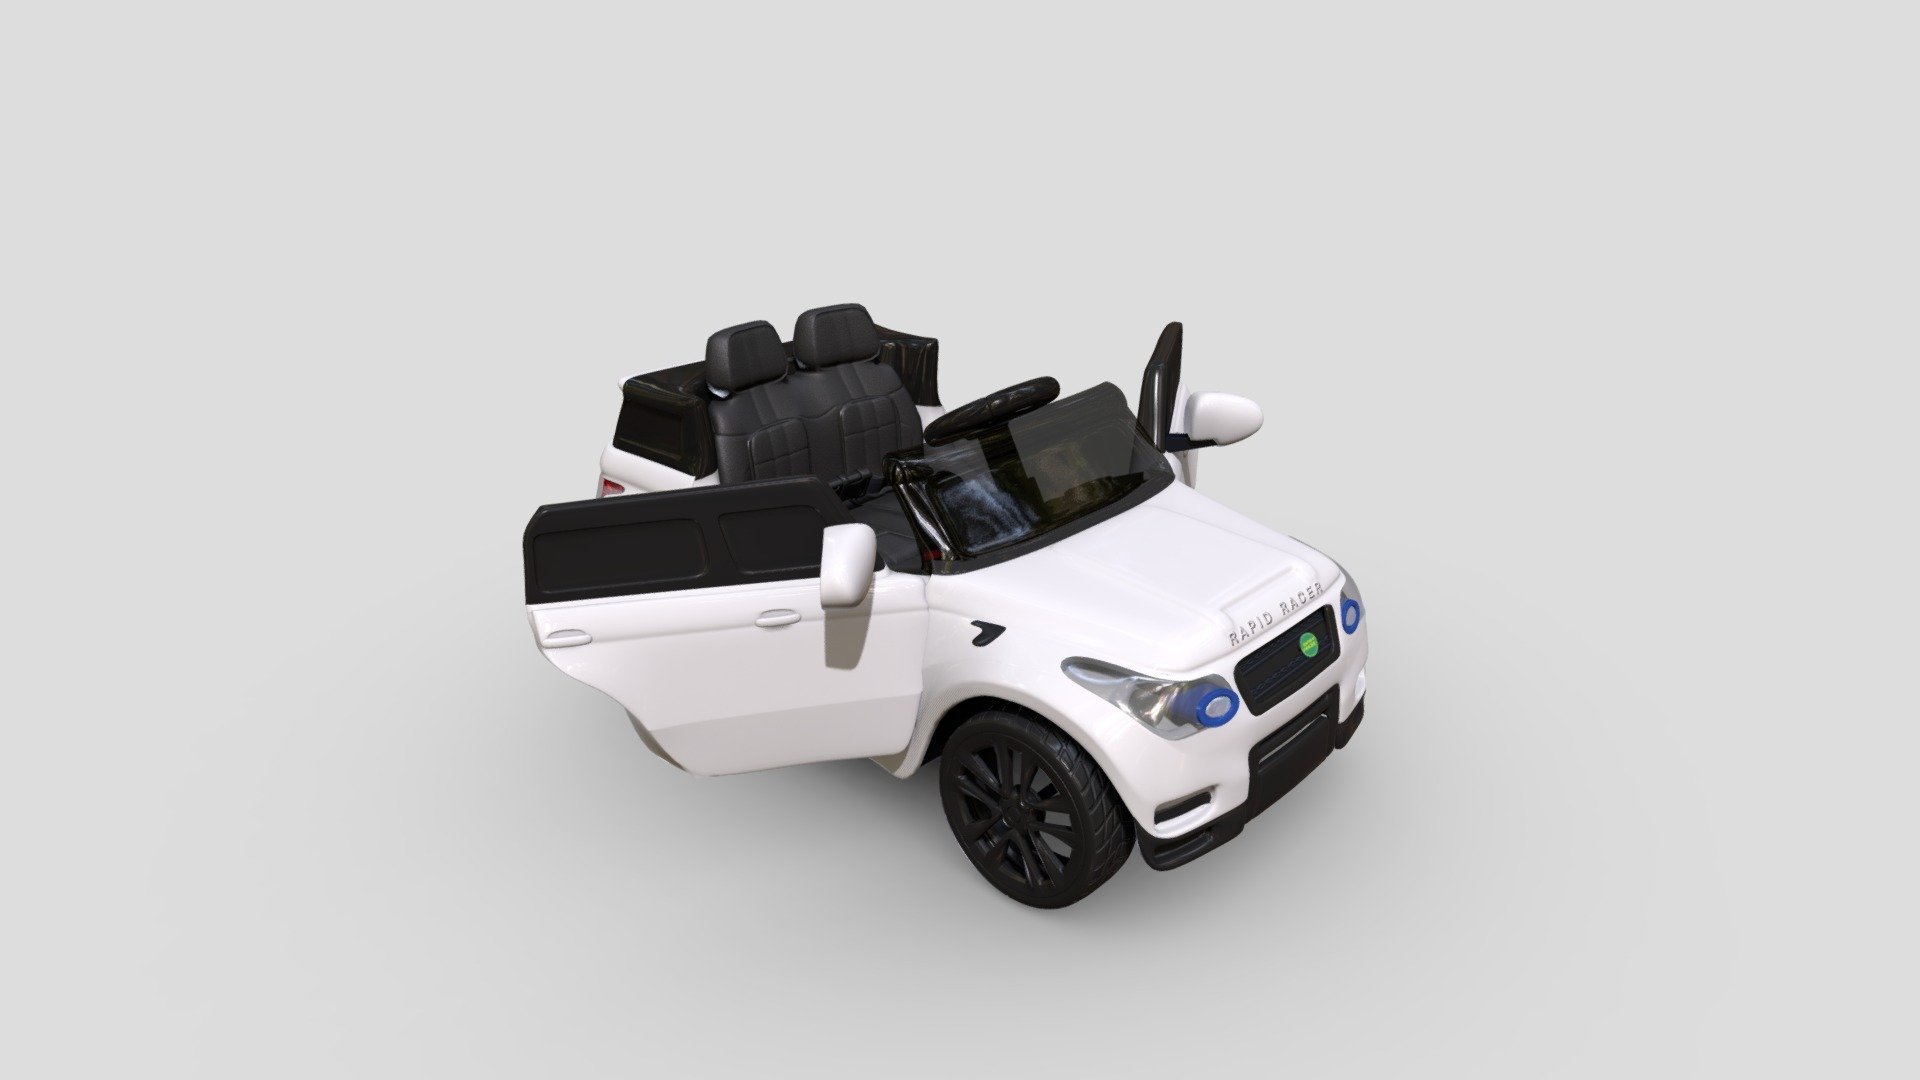 Check out this high quality 3D model of a children's toy car.

For your 3D modelling requirements or if you wish to purchase this model, connect with us at info@shinobu3d.com.

We offer premium quality low poly 3D assets/models for AR/VR applications, 3D visualisations, 3D product configurators, 3D printing &amp; 3D animations.

Visit https://www.shinobu3d.com for more on us 3d model